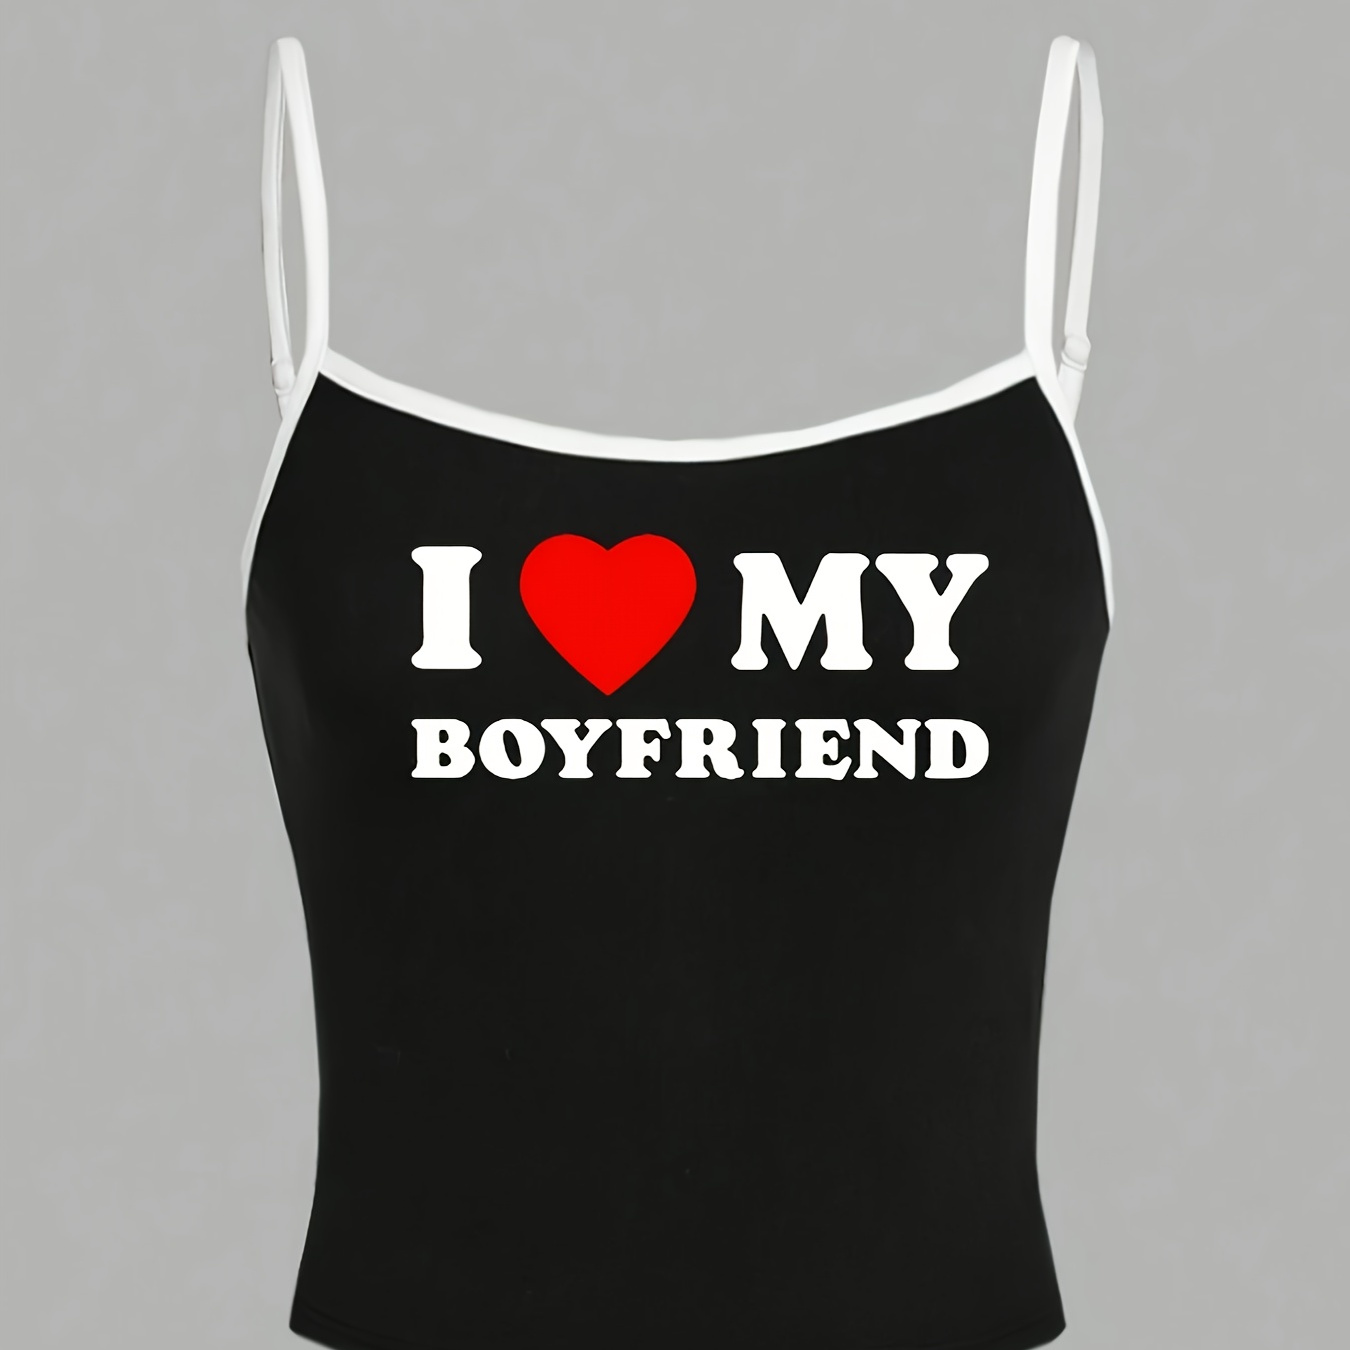 

I Love My Boyfriend Print Cami Top, Casual Contrast Trim Sleeveless Cami Top For Summer, Women's Clothing